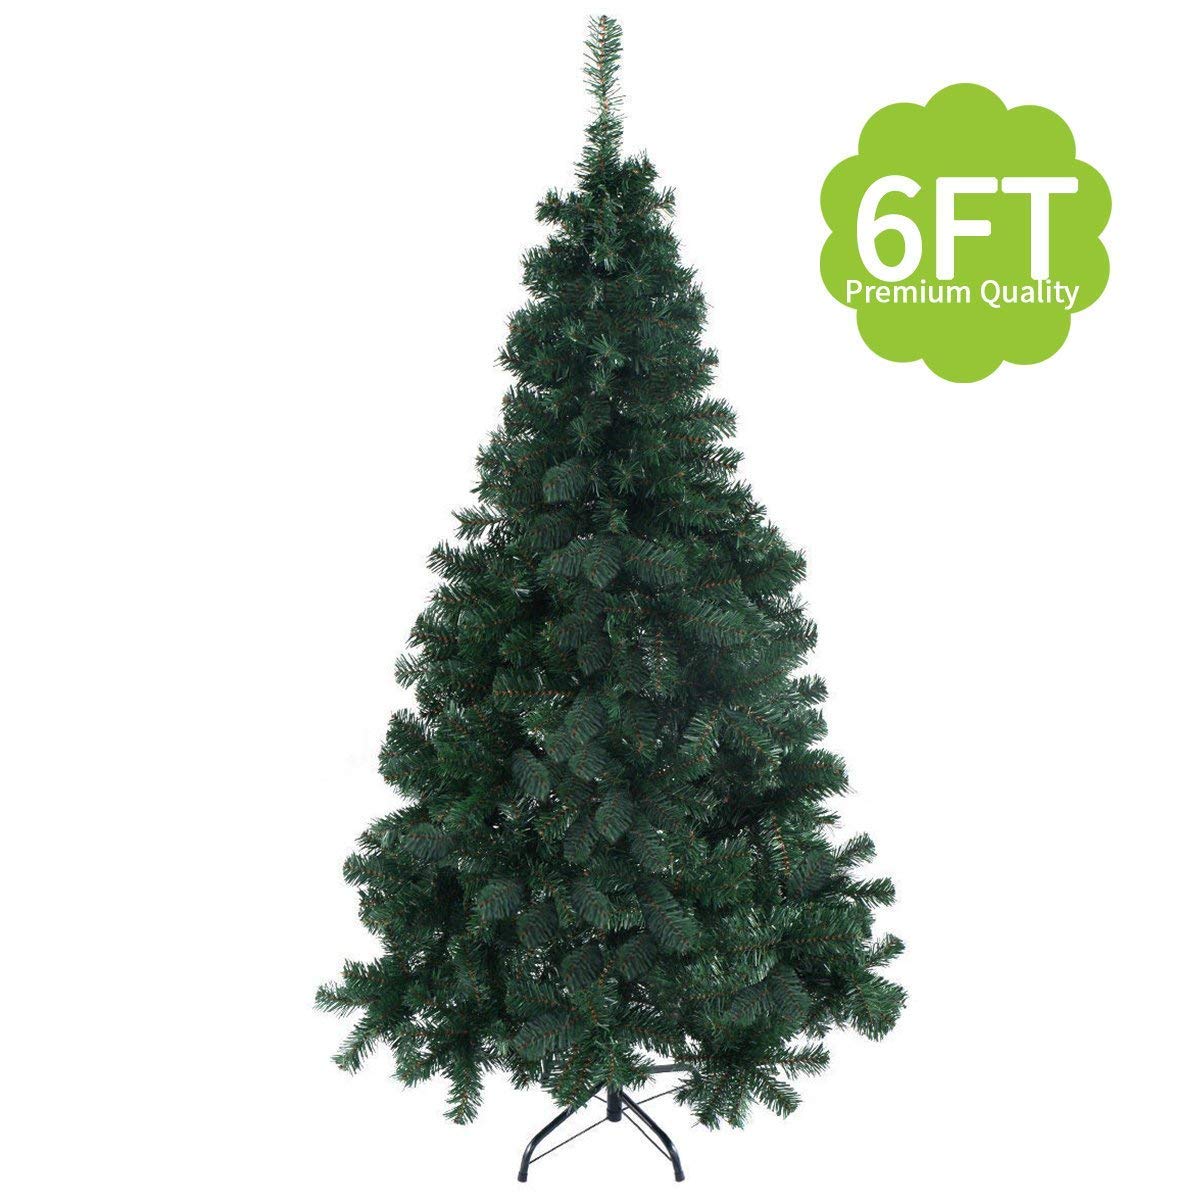 6-ft Jaxpety artificial Christmas tree for $21